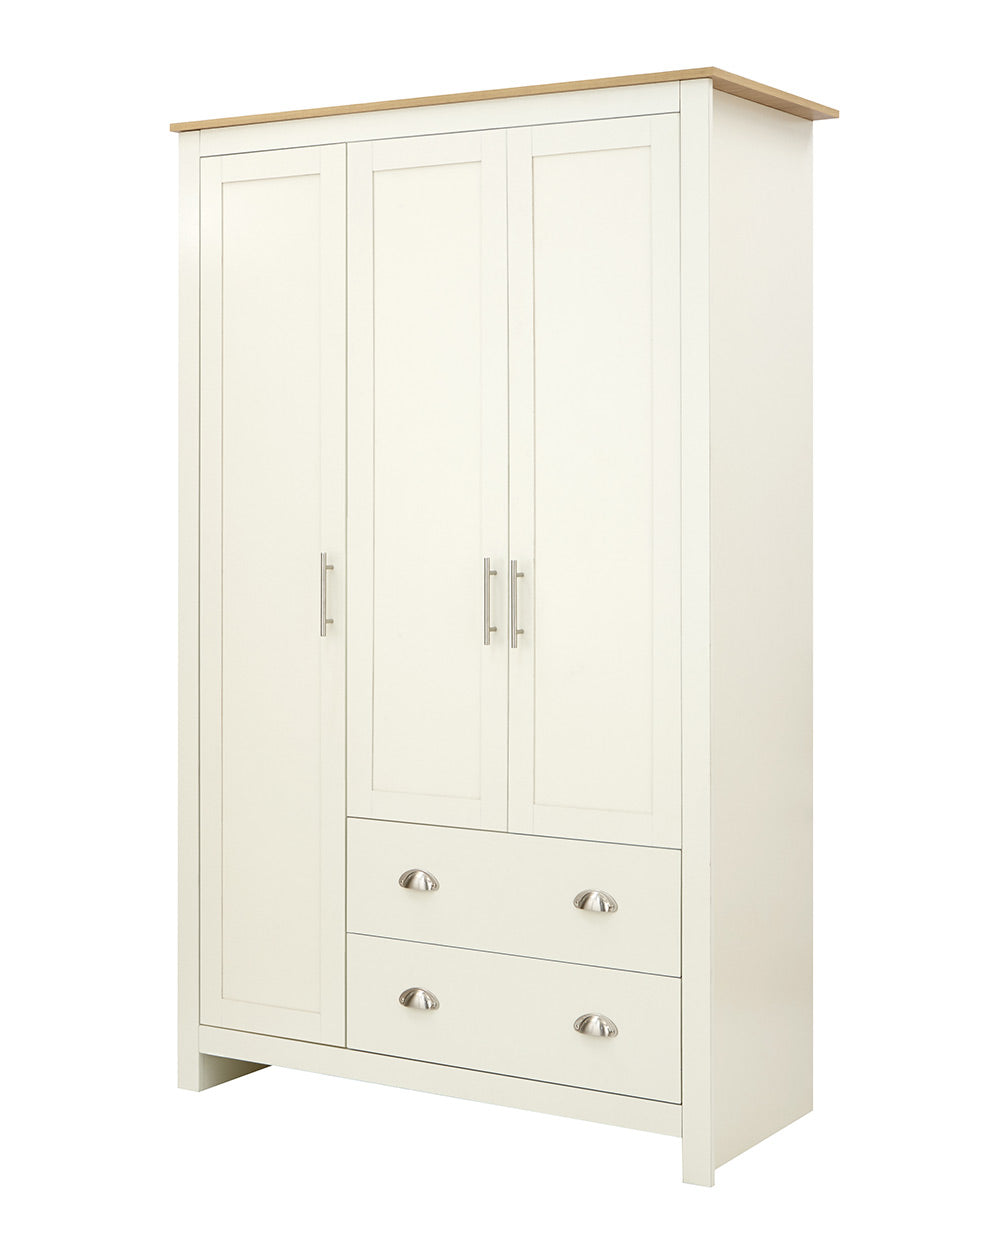 Lancaster 3 door 2 drawer wardrobe shaker style doors on a white cut out background front facing